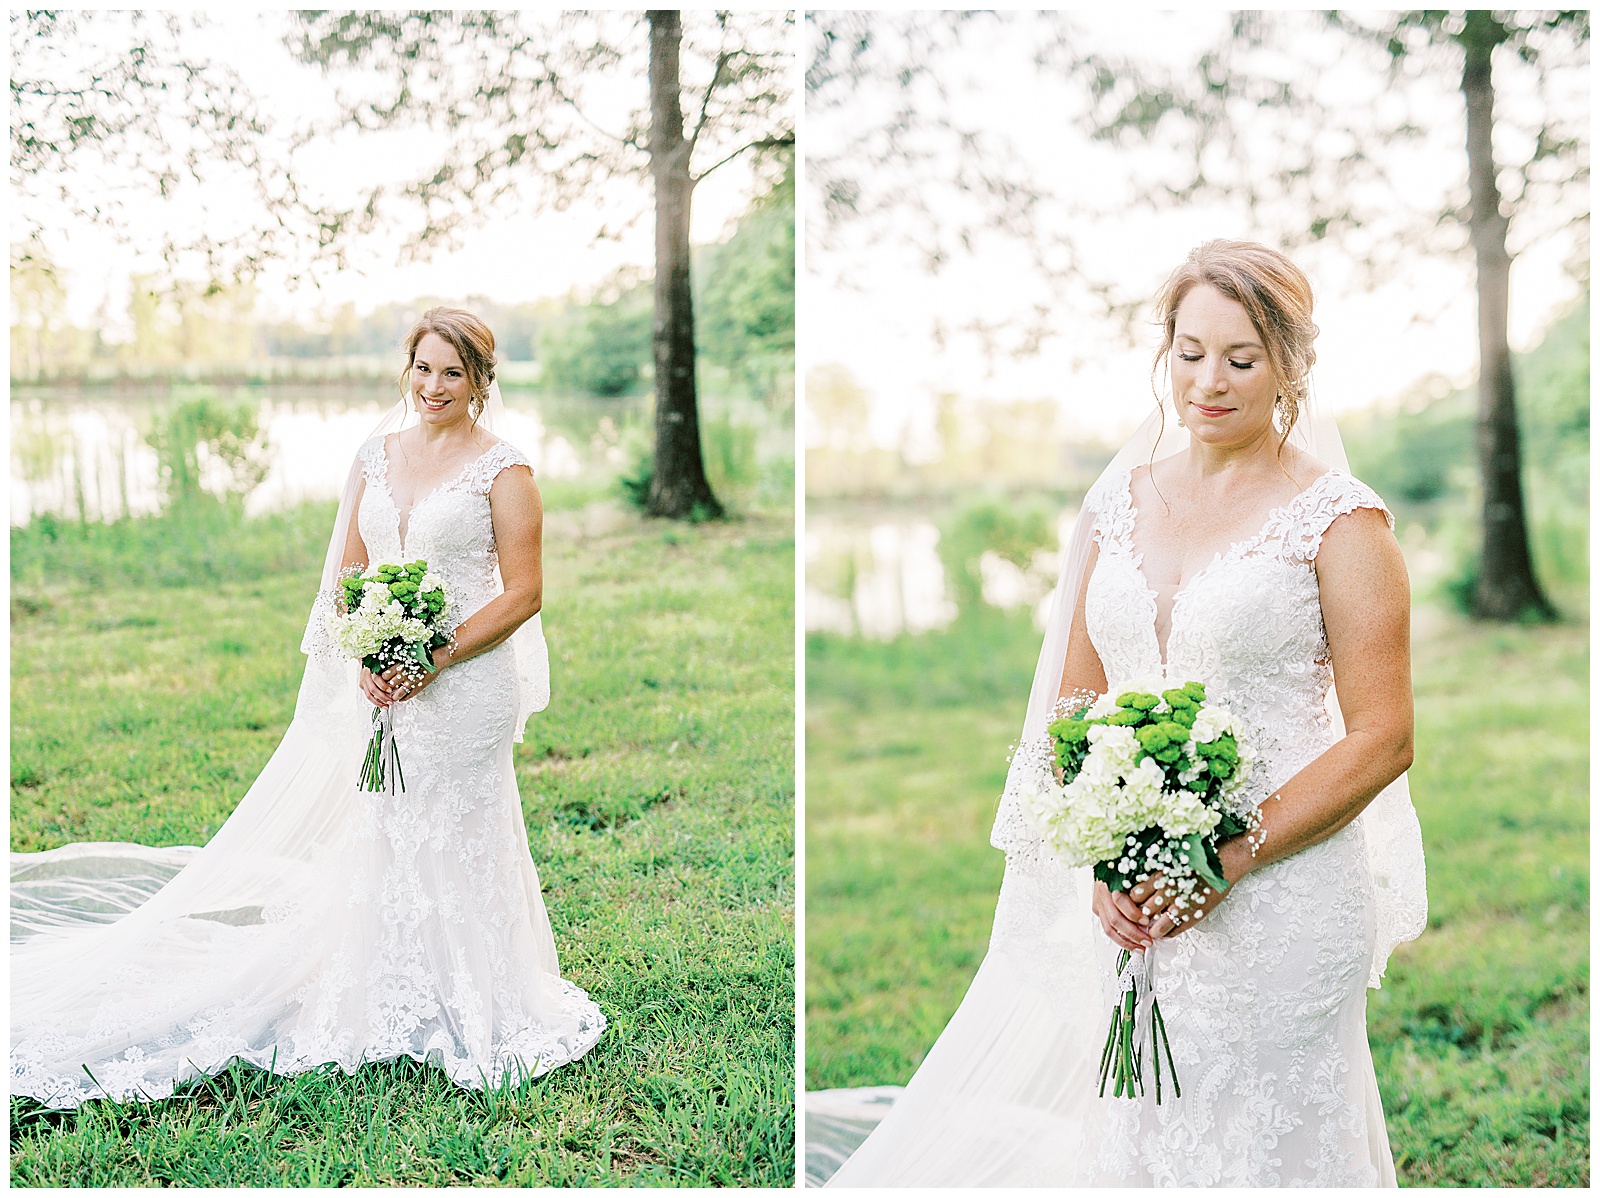 lace wedding dress from sunset bridal portraits in woods and field